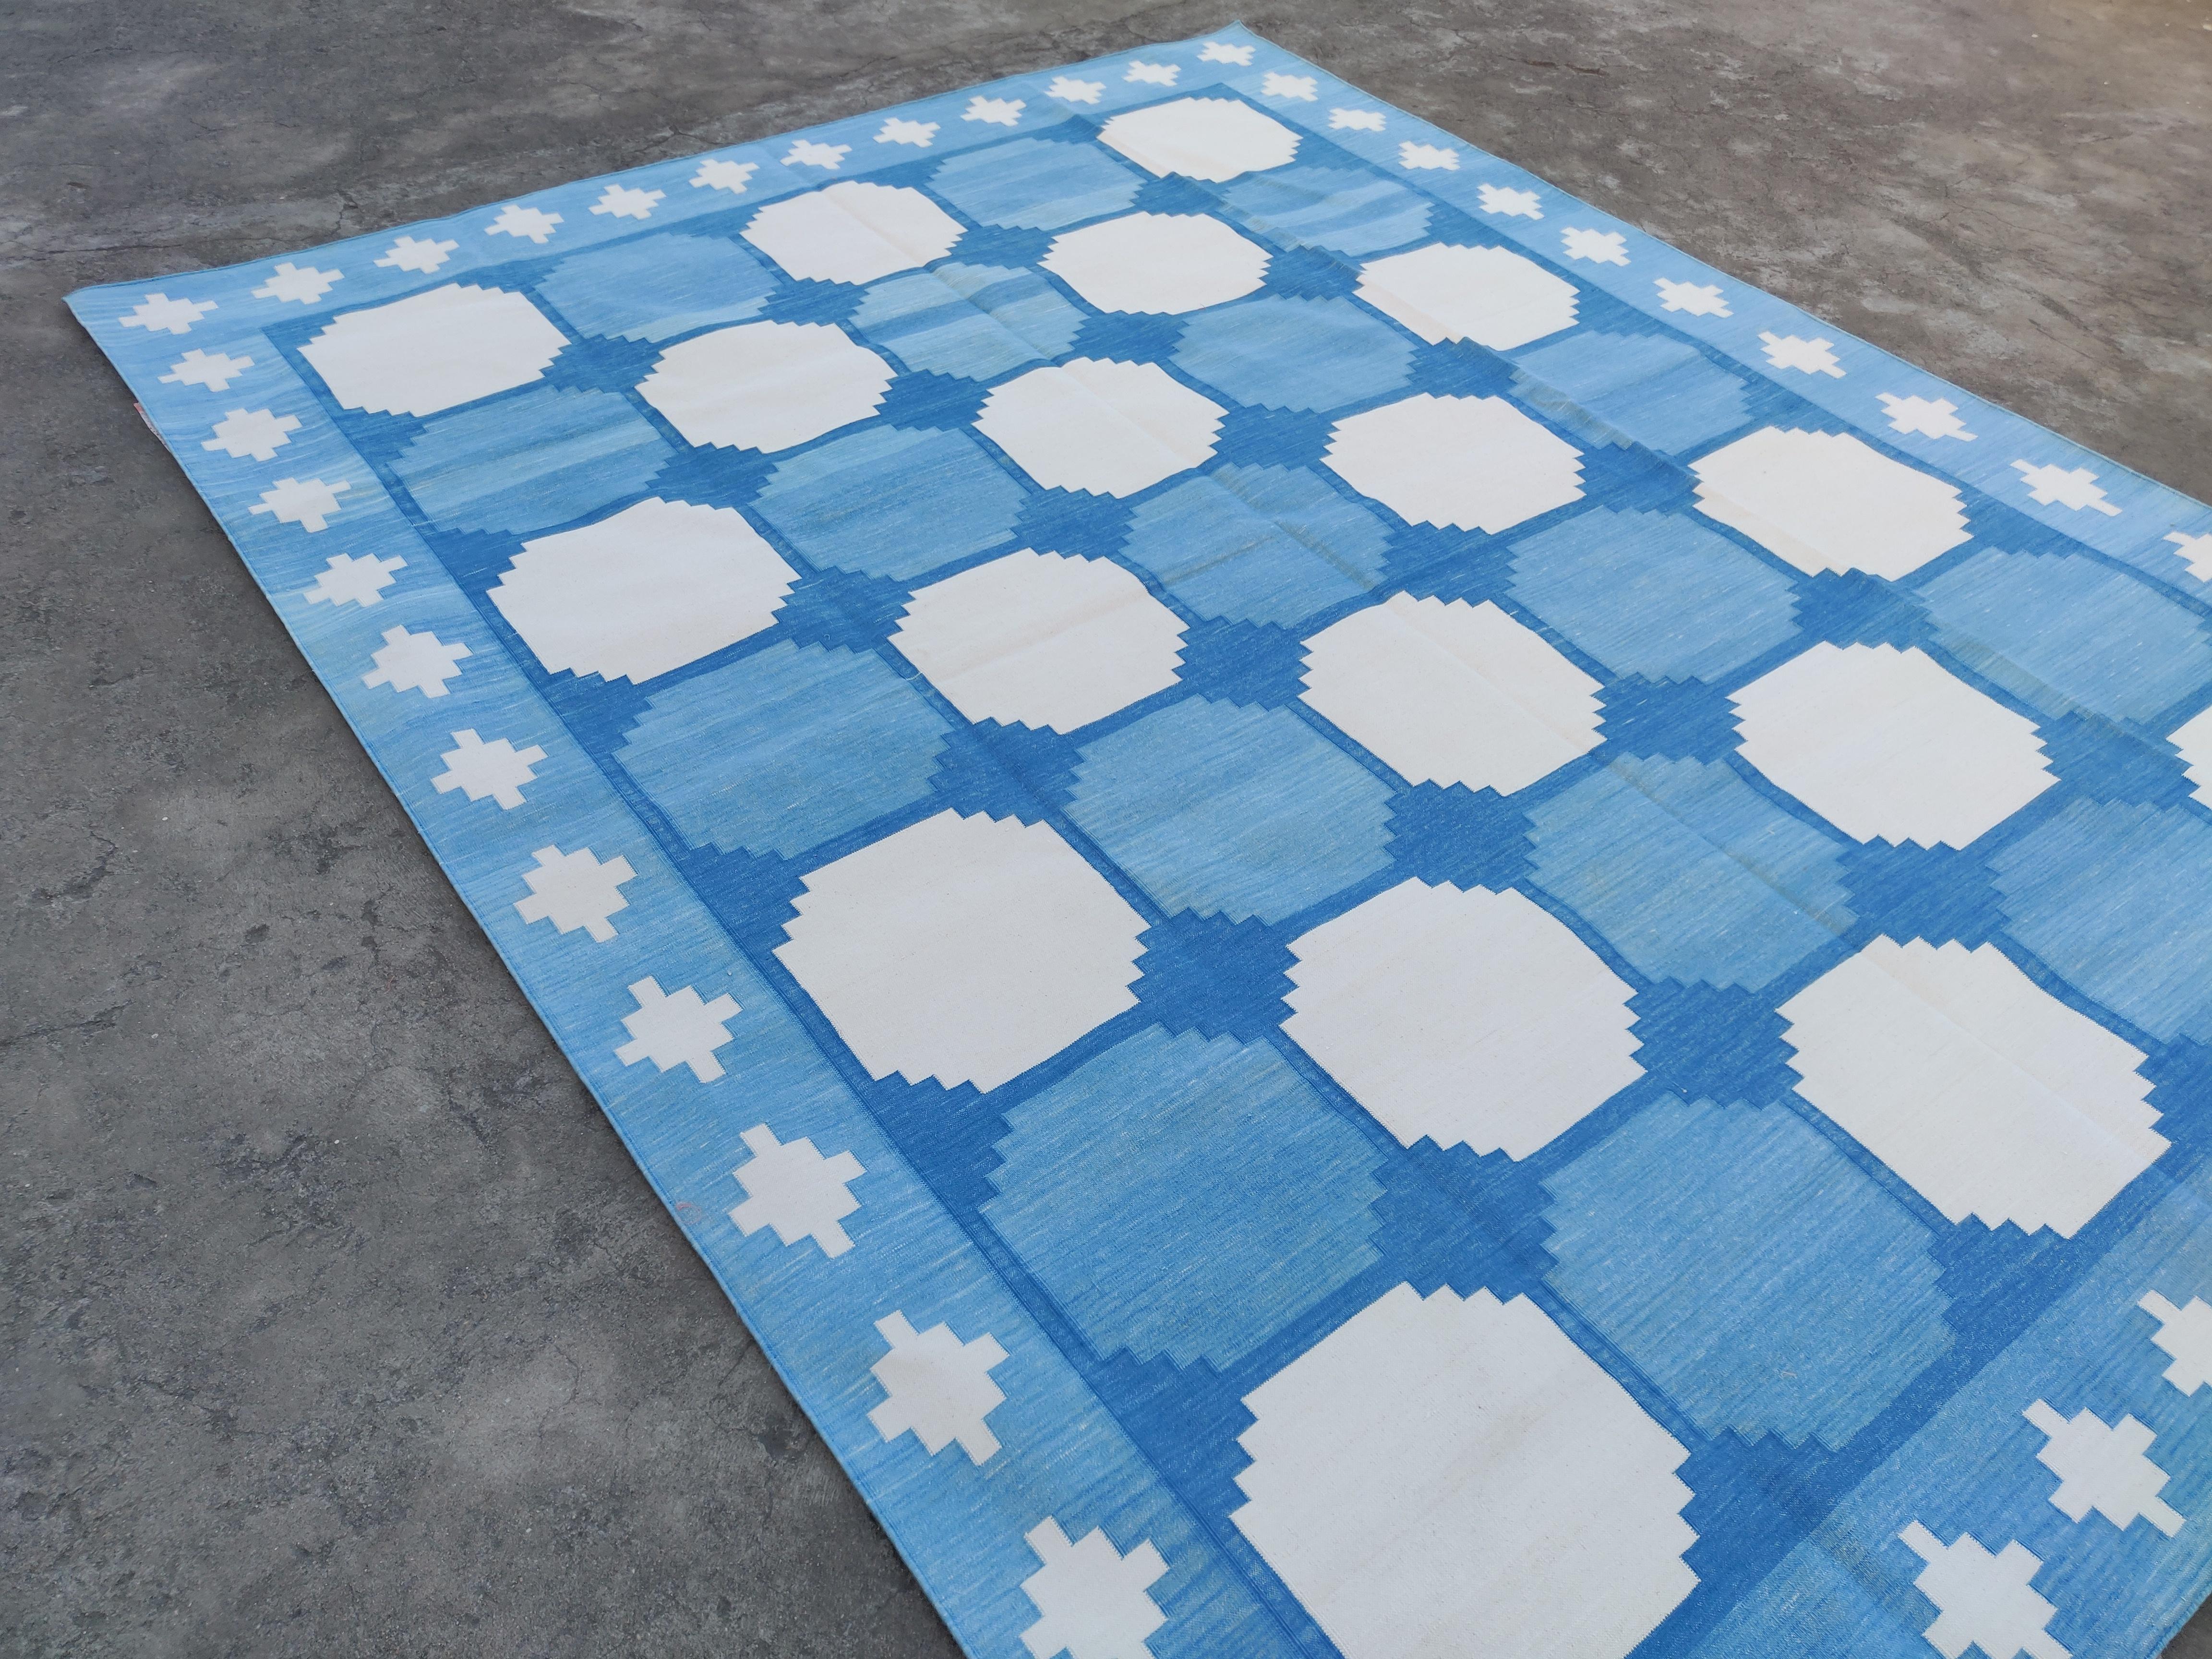 Contemporary Handmade Cotton Area Flat Weave Rug, 6x9 Blue, White Tile Pattern Indian Dhurrie For Sale